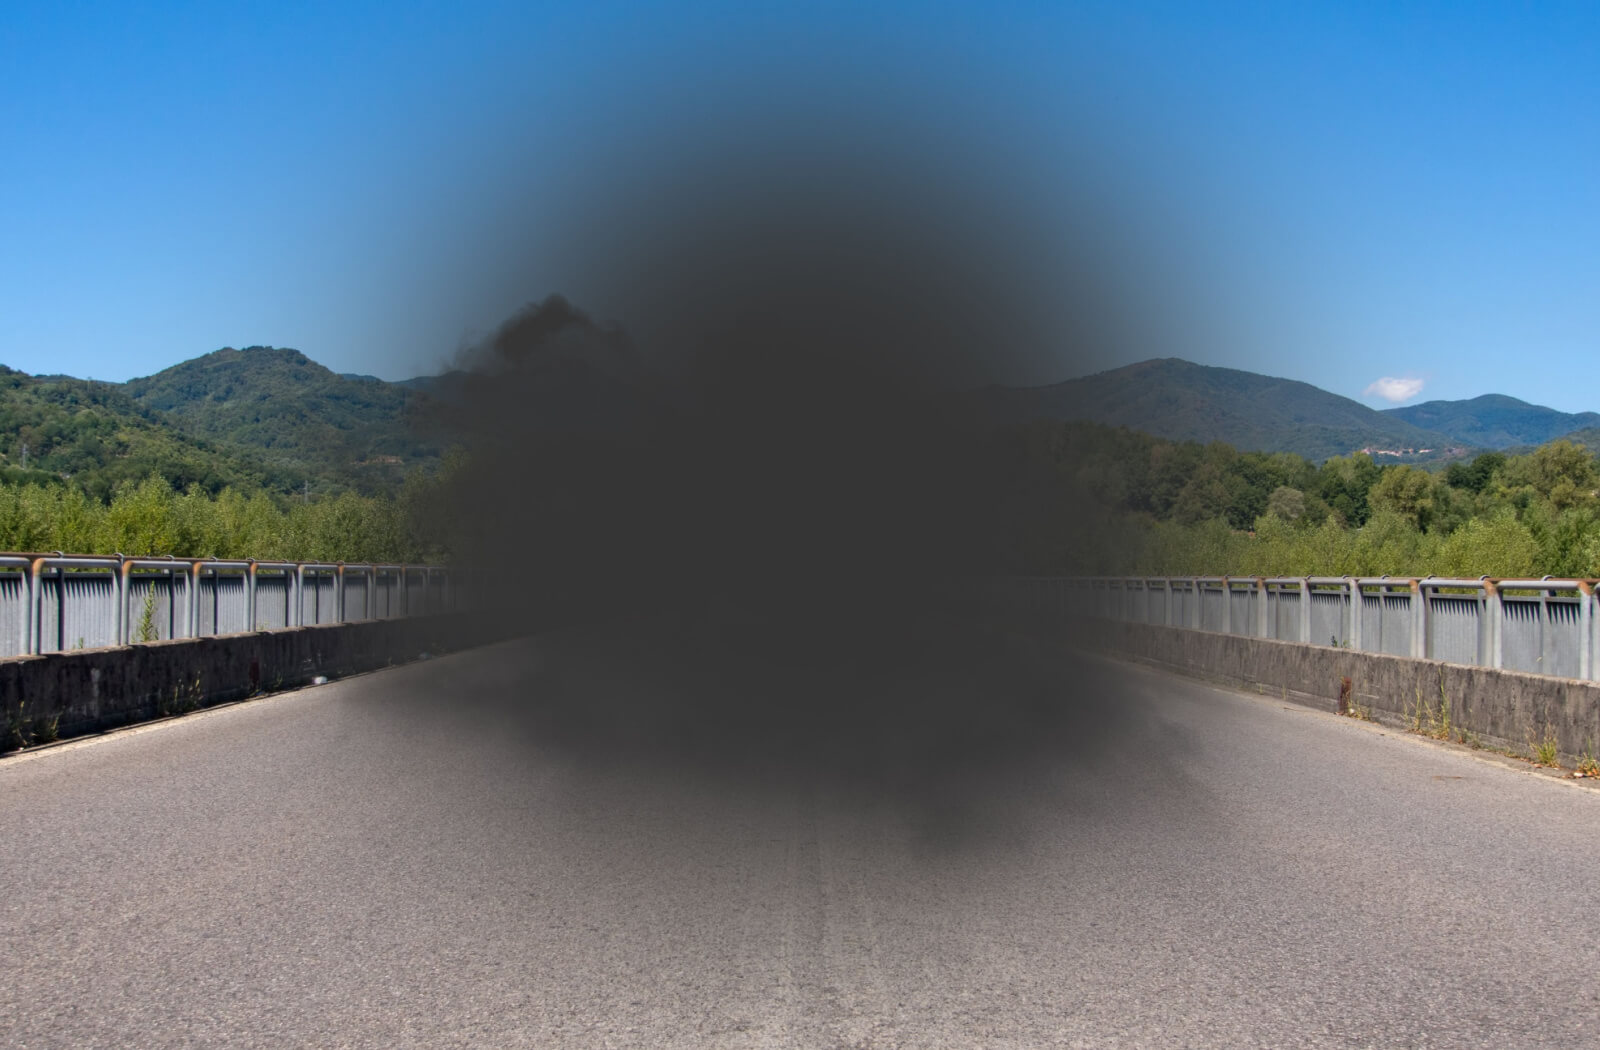 A view of a concrete bridge on a sunny day with a dark grey spot blocking central vision, representing the POV of a person with macular degeneration.